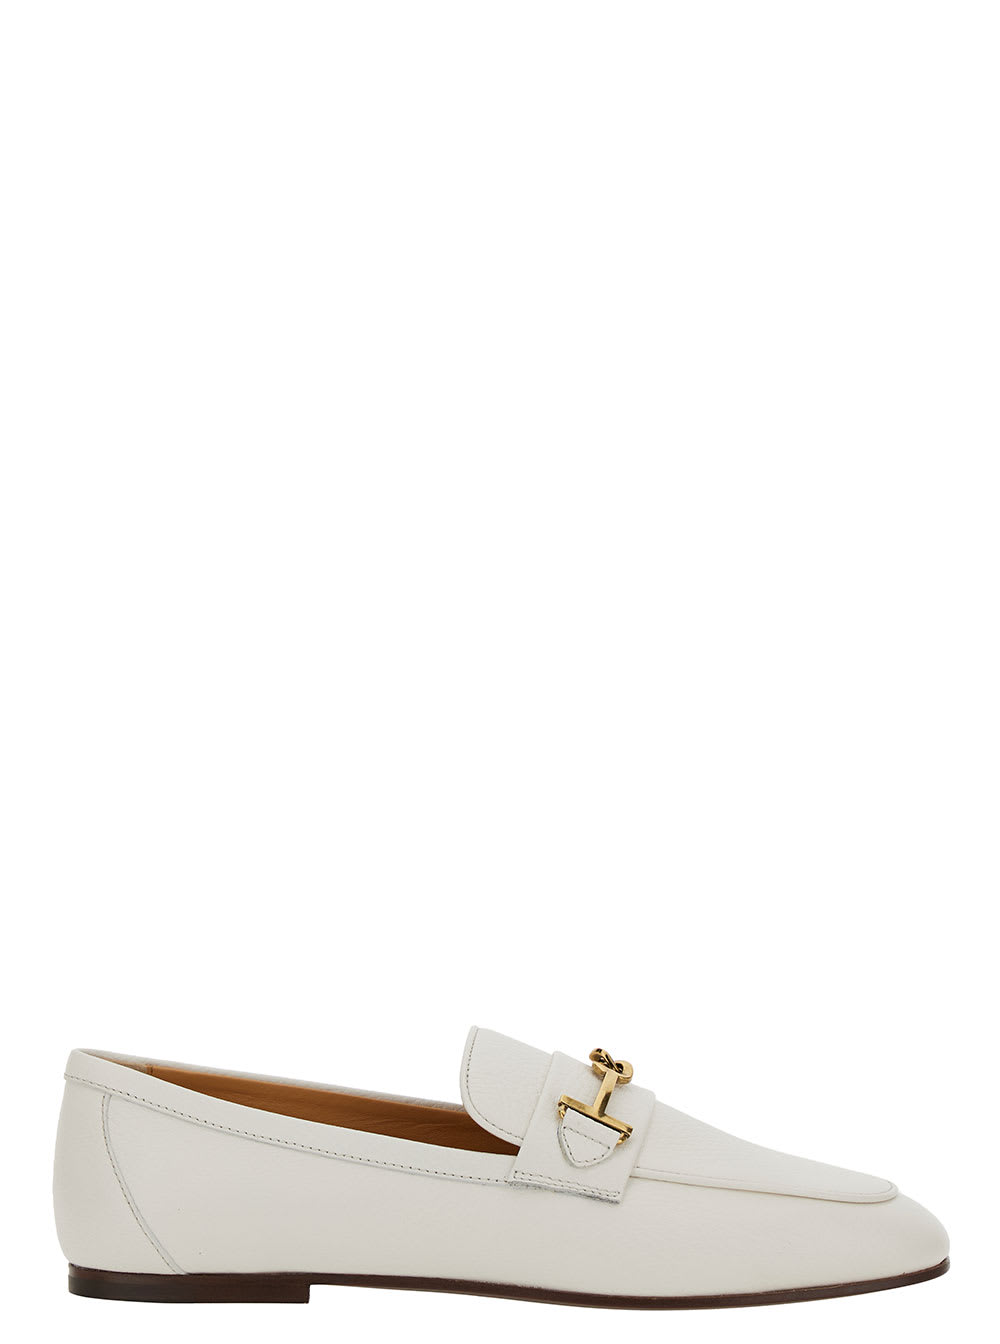 TOD'S WHITE LOAFERS WITH GOLD-TONE DOUBLE T DETAIL IN LEATHER WOMAN